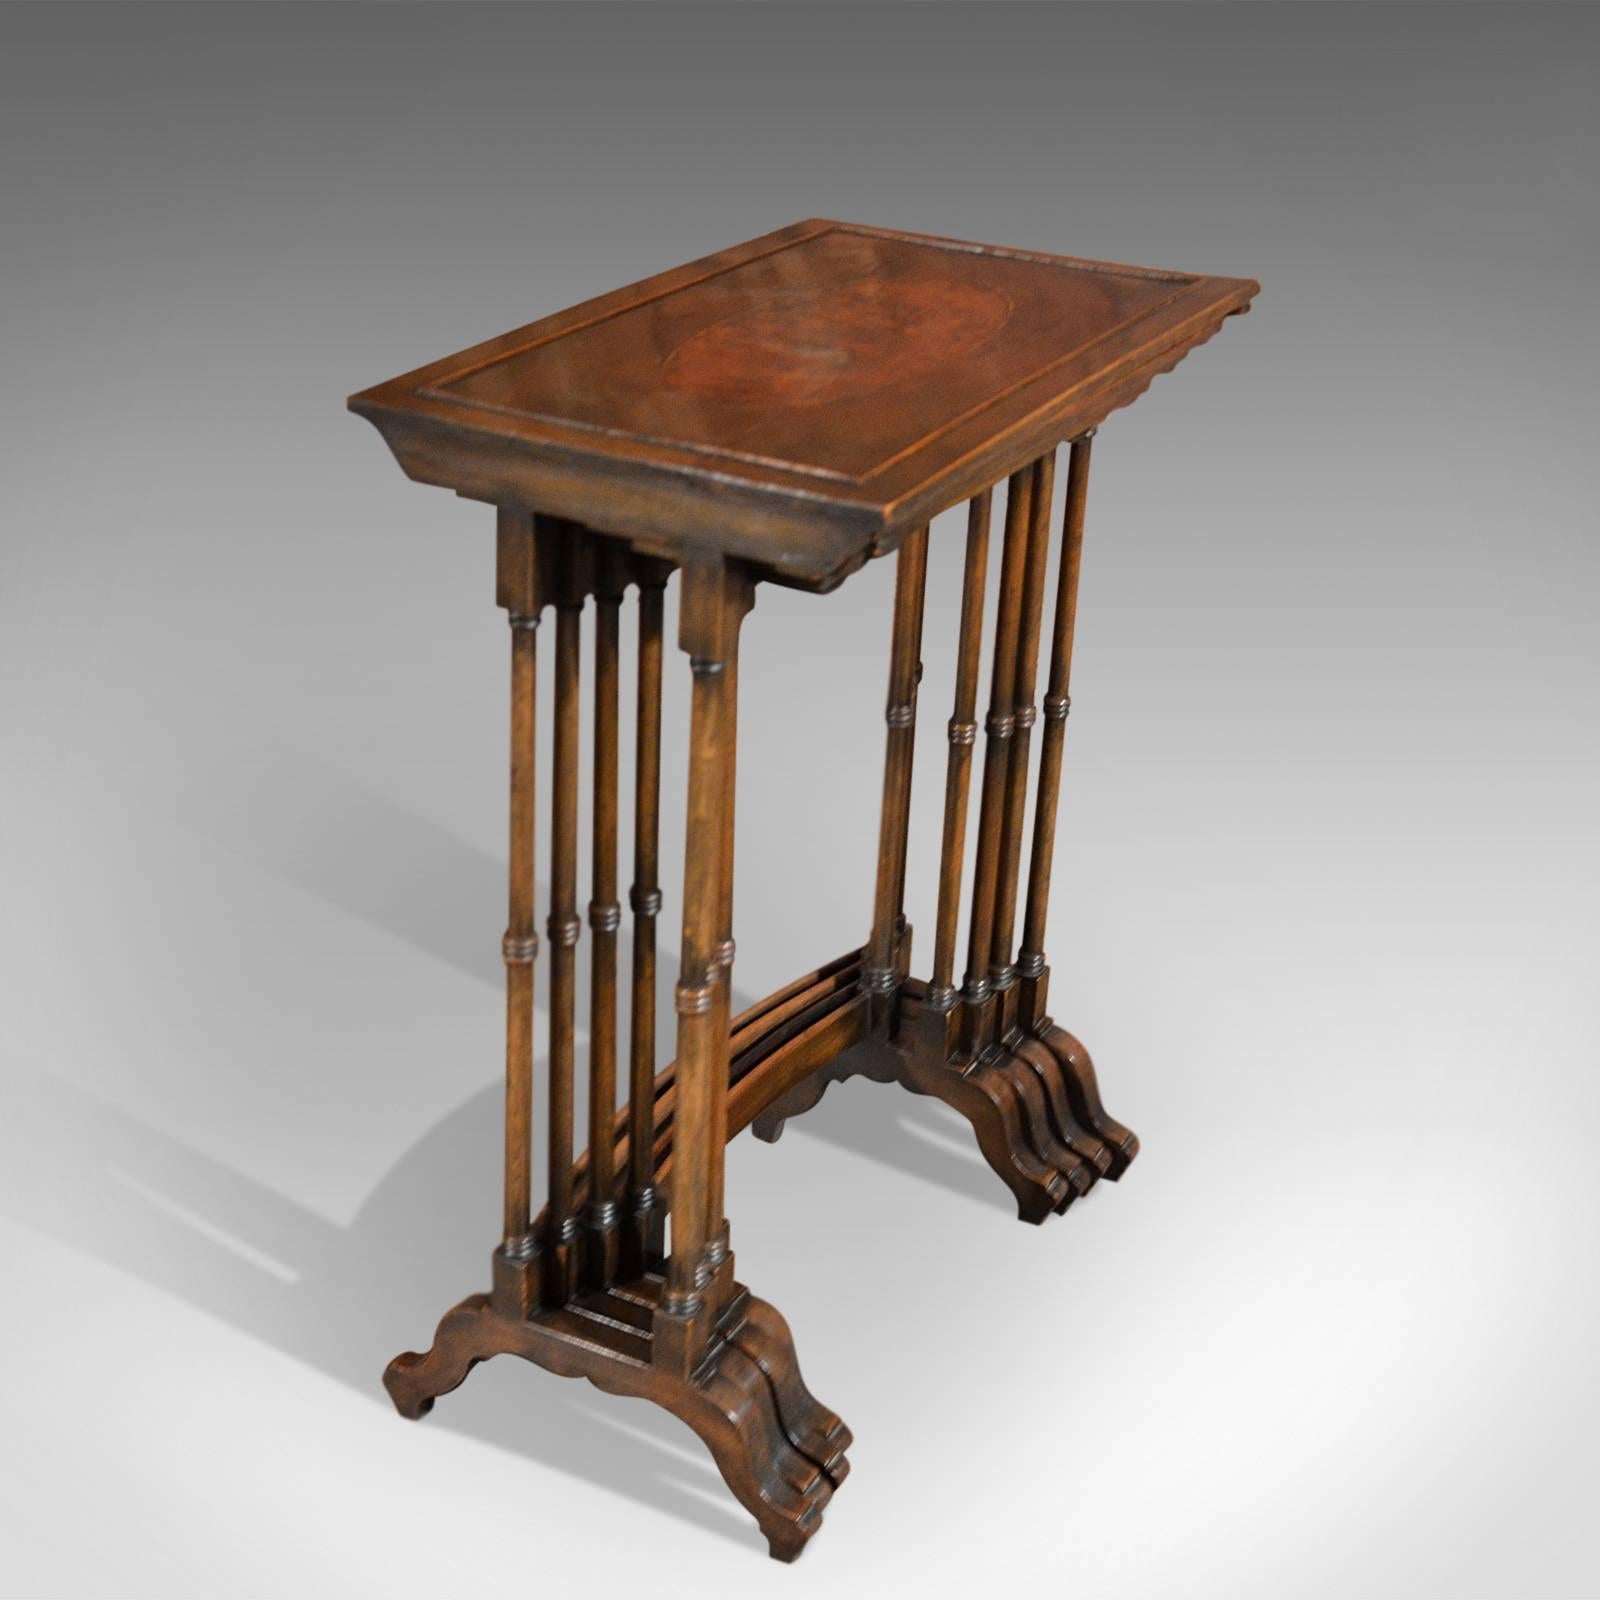 This is an walnut quartetto antique nest of tables.

Dating to the latter part of the 19th century, this rare quartetto nest of tables display superb craftsmanship seamlessly stacking within the largest table.

Each of the galleried table tops